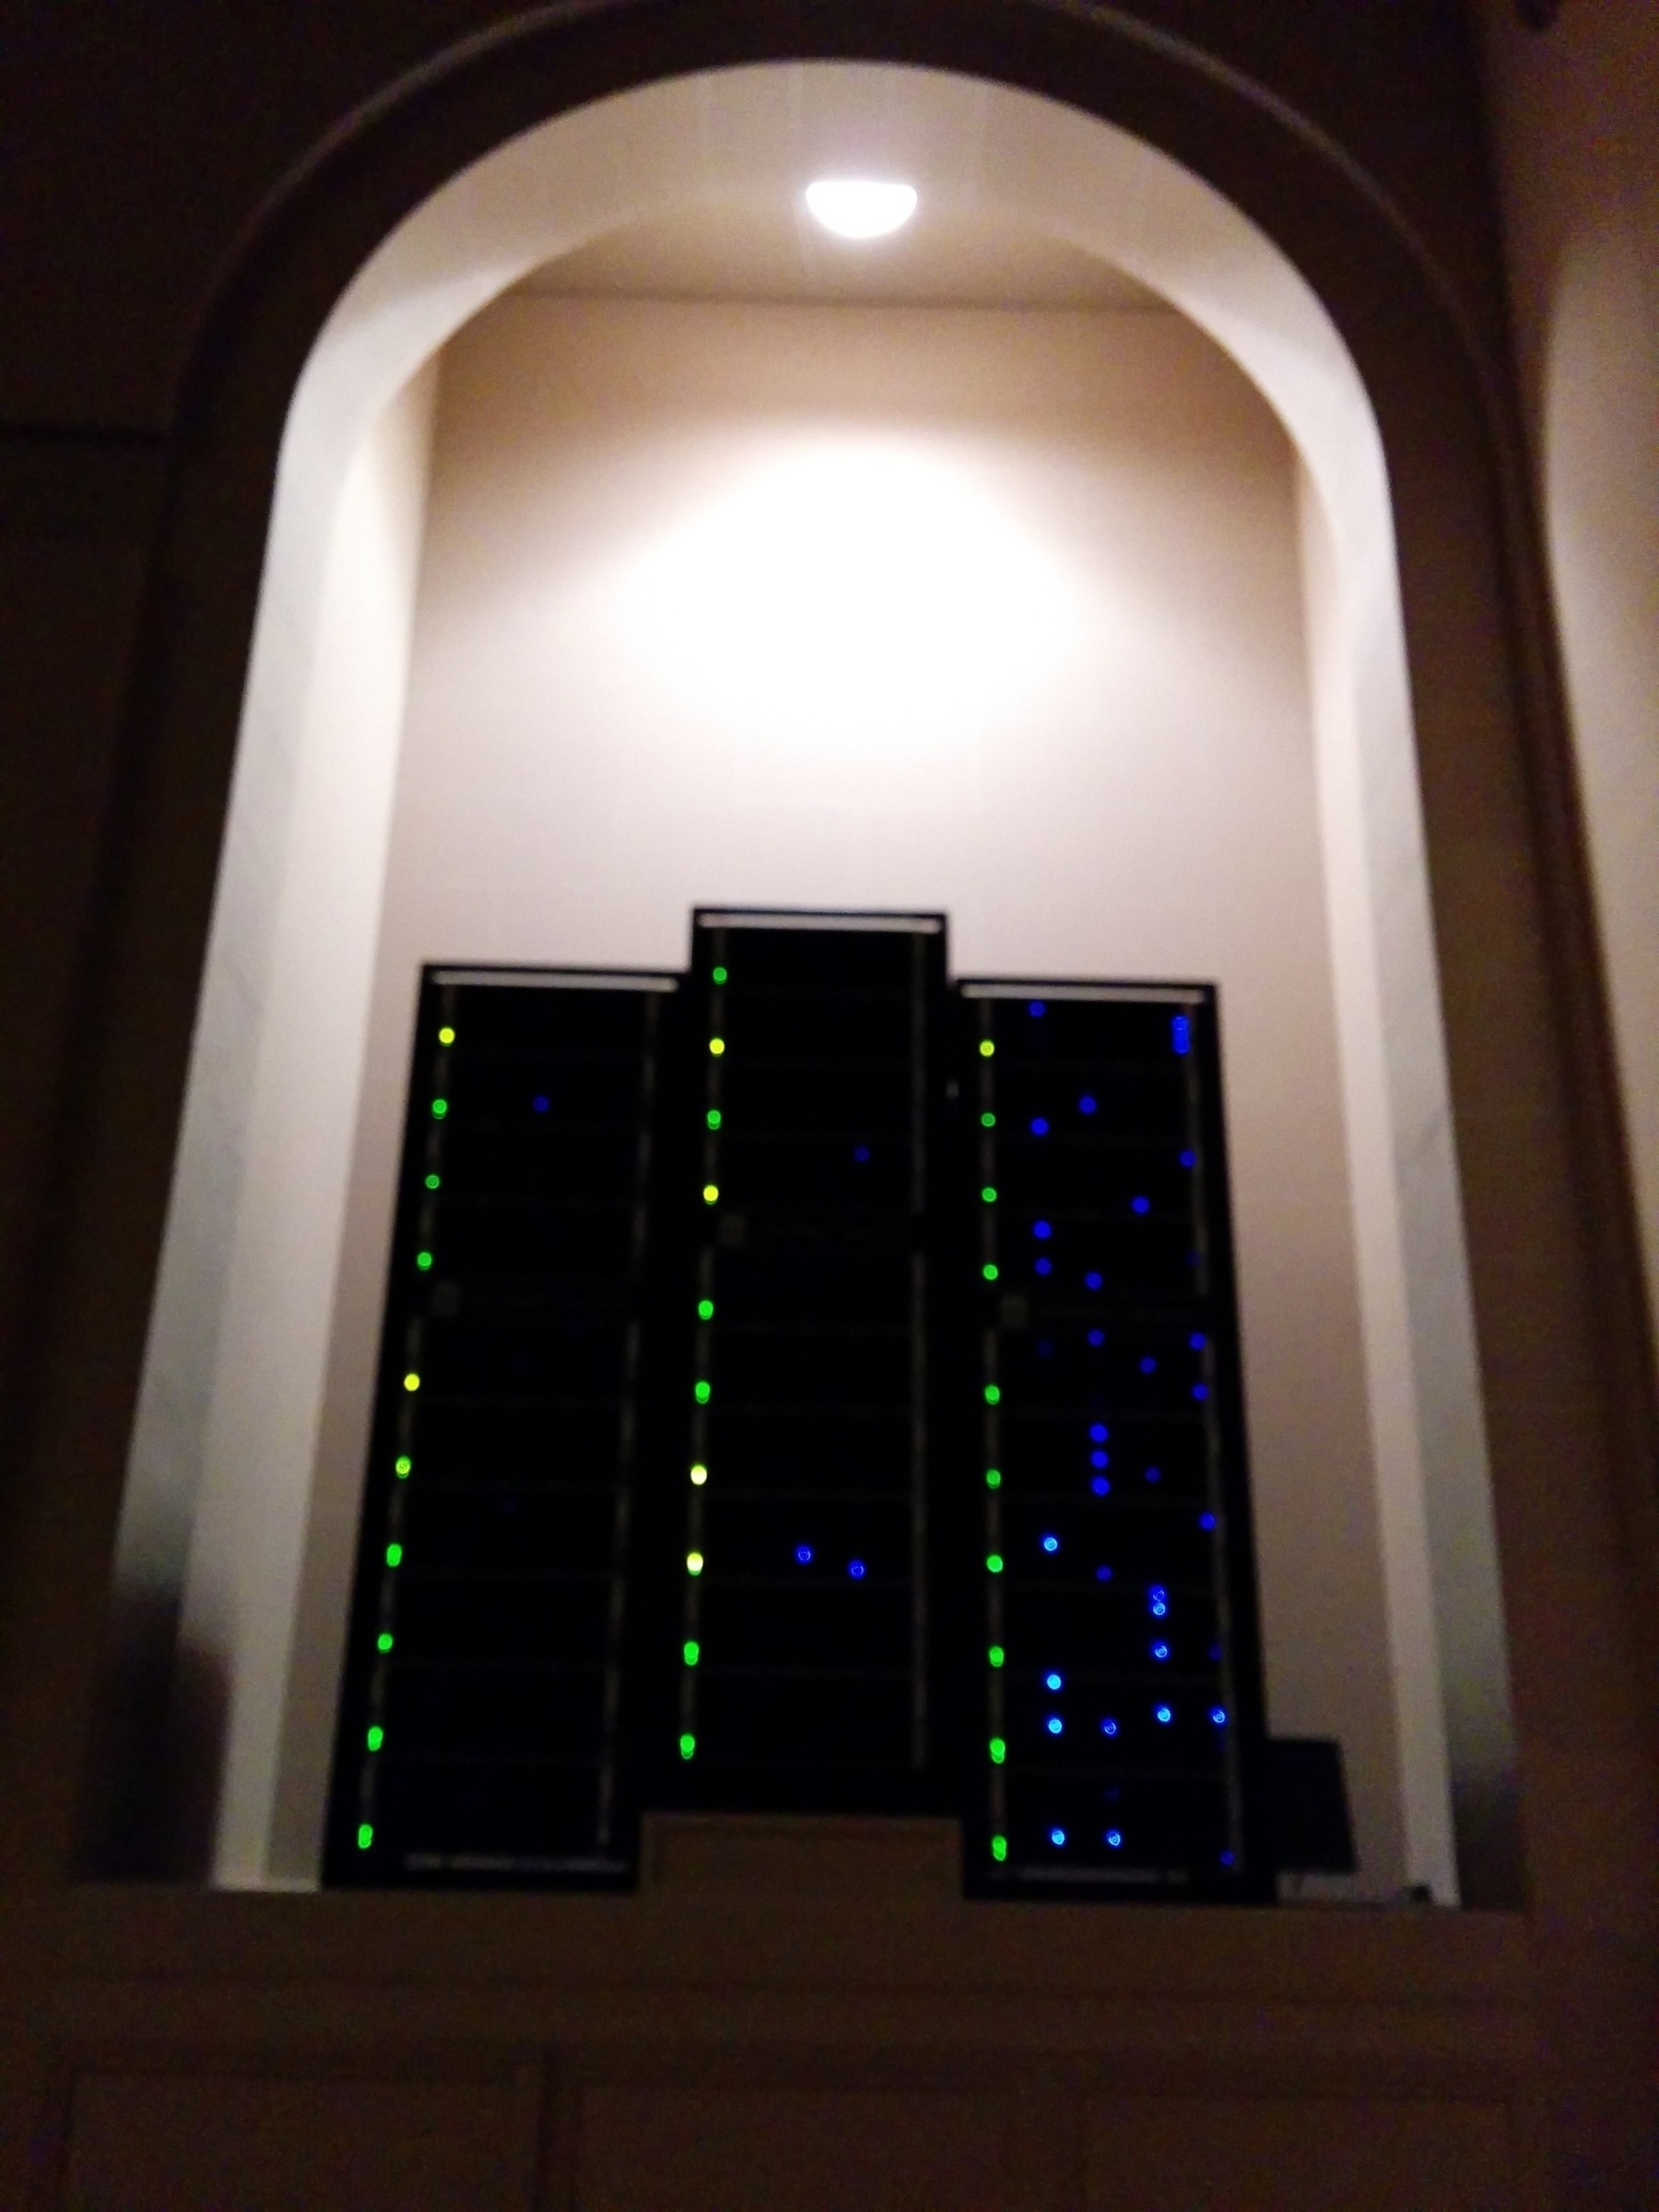 Server rack with blinky lights in a church alcove that probably housed some religious statue a long time ago